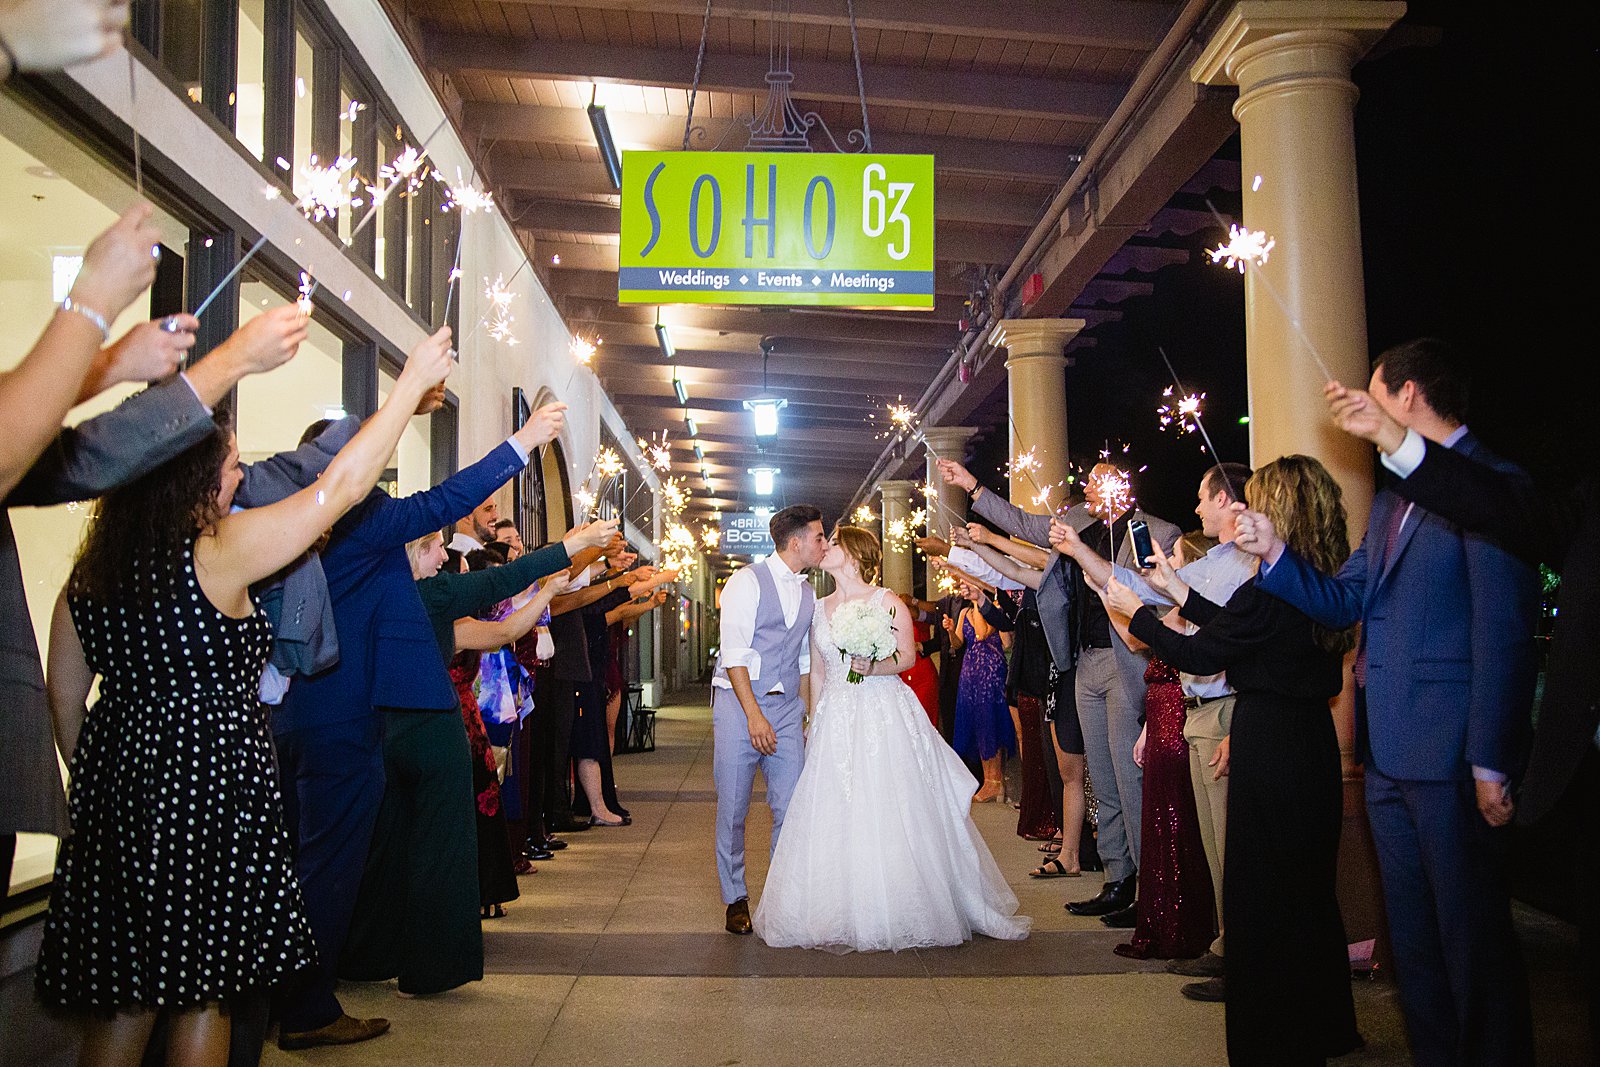 Bride and groom's sparkler exit at SoHo63 wedding venue by PMA Photography.